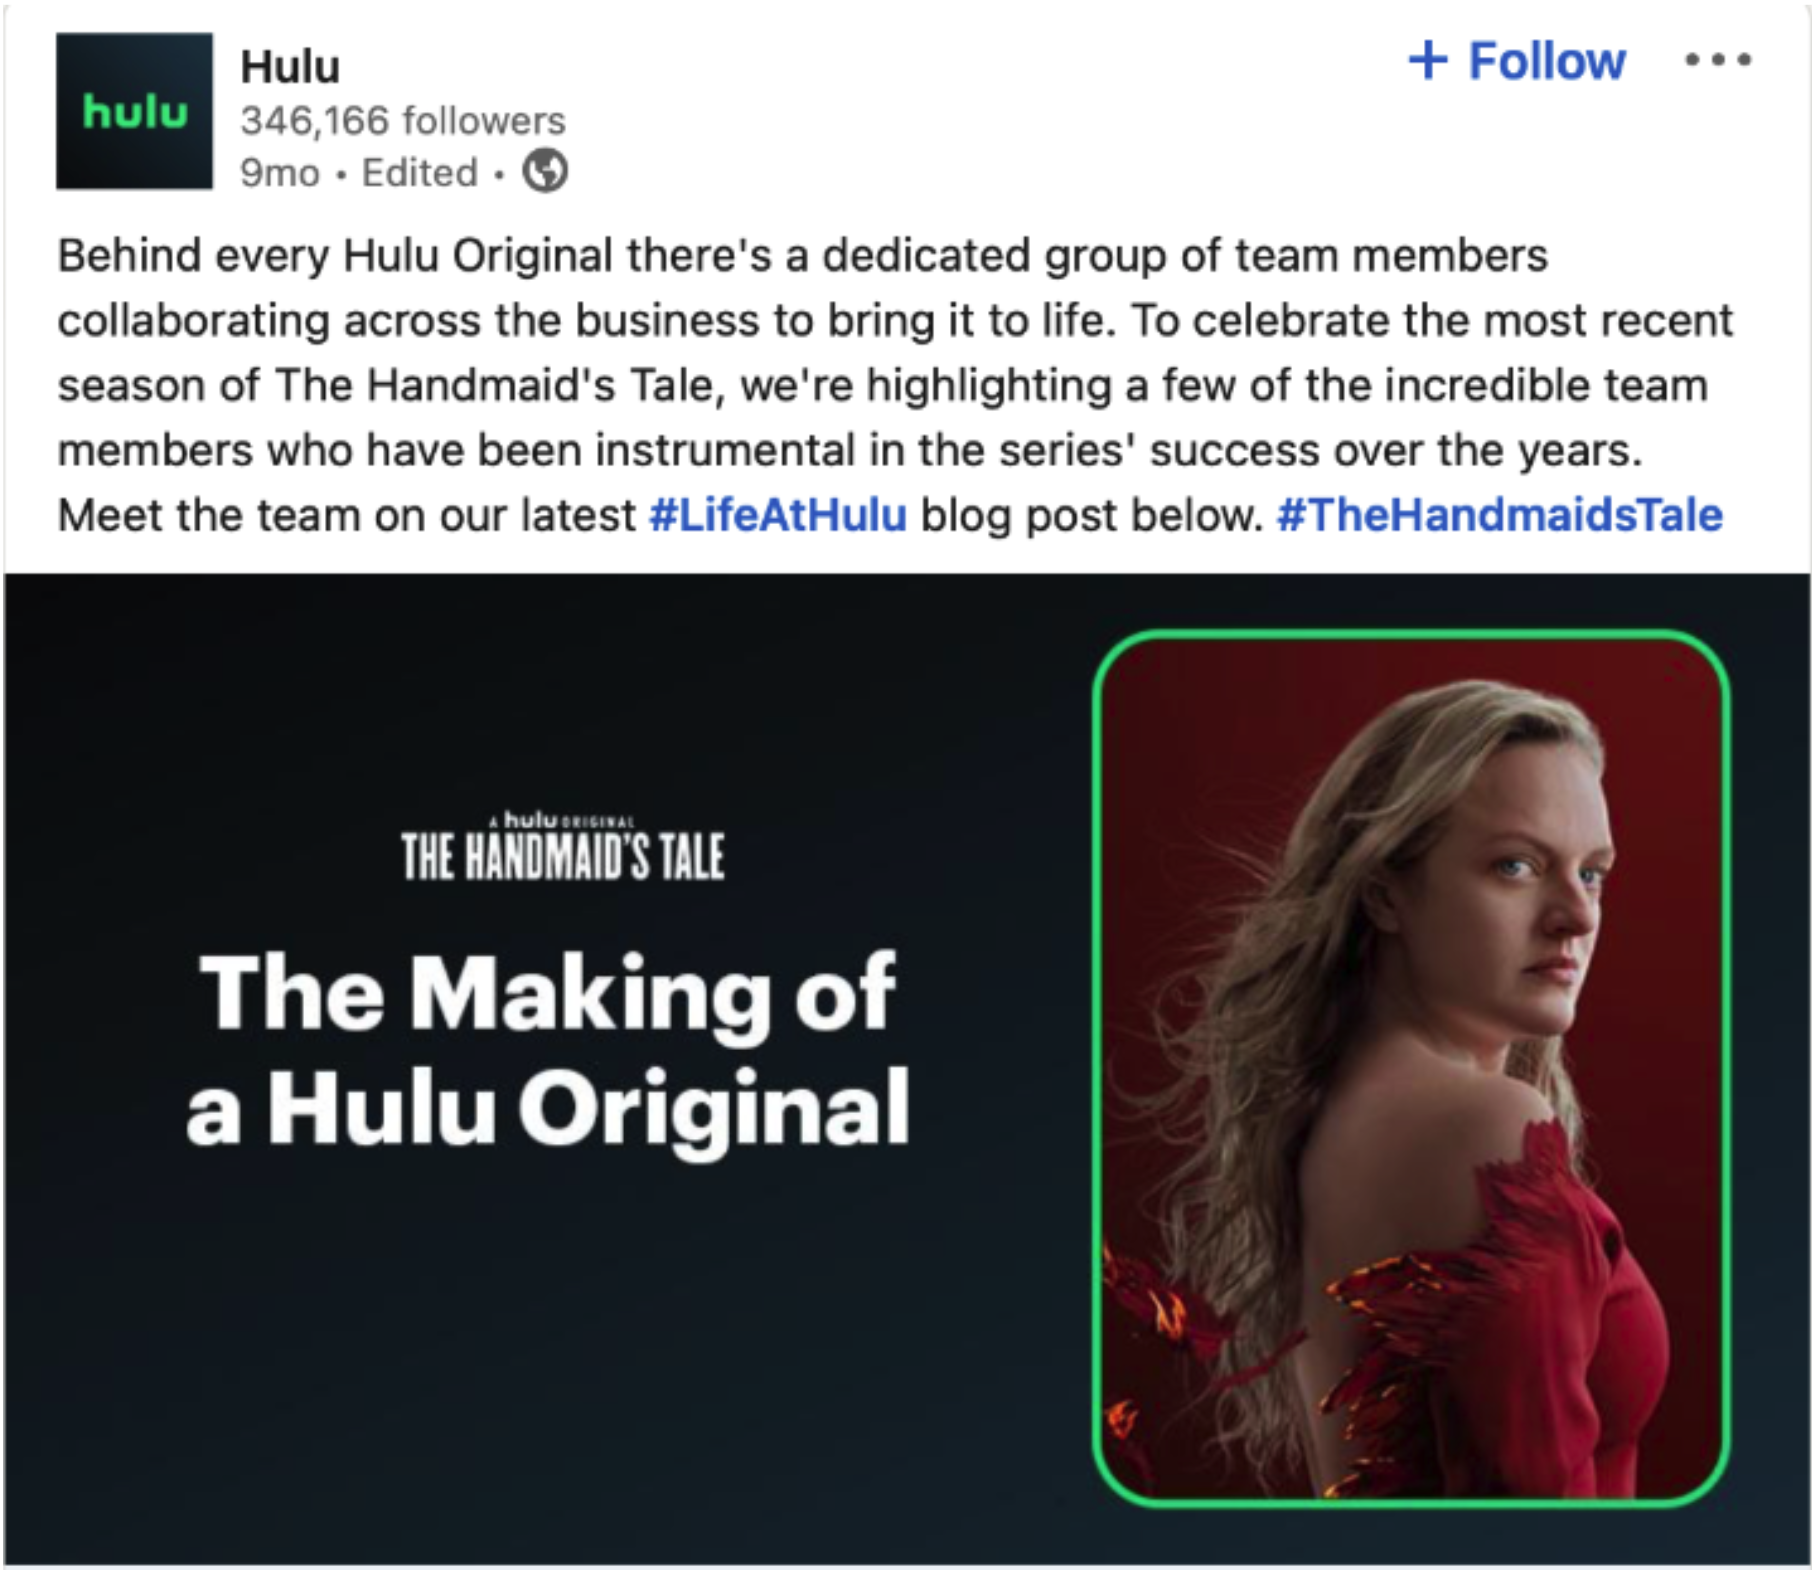 A screenshot of a Hulu LinkedIn Post about the behind the scenes The Making Of A Hulu Original from The Handmaid's Tale